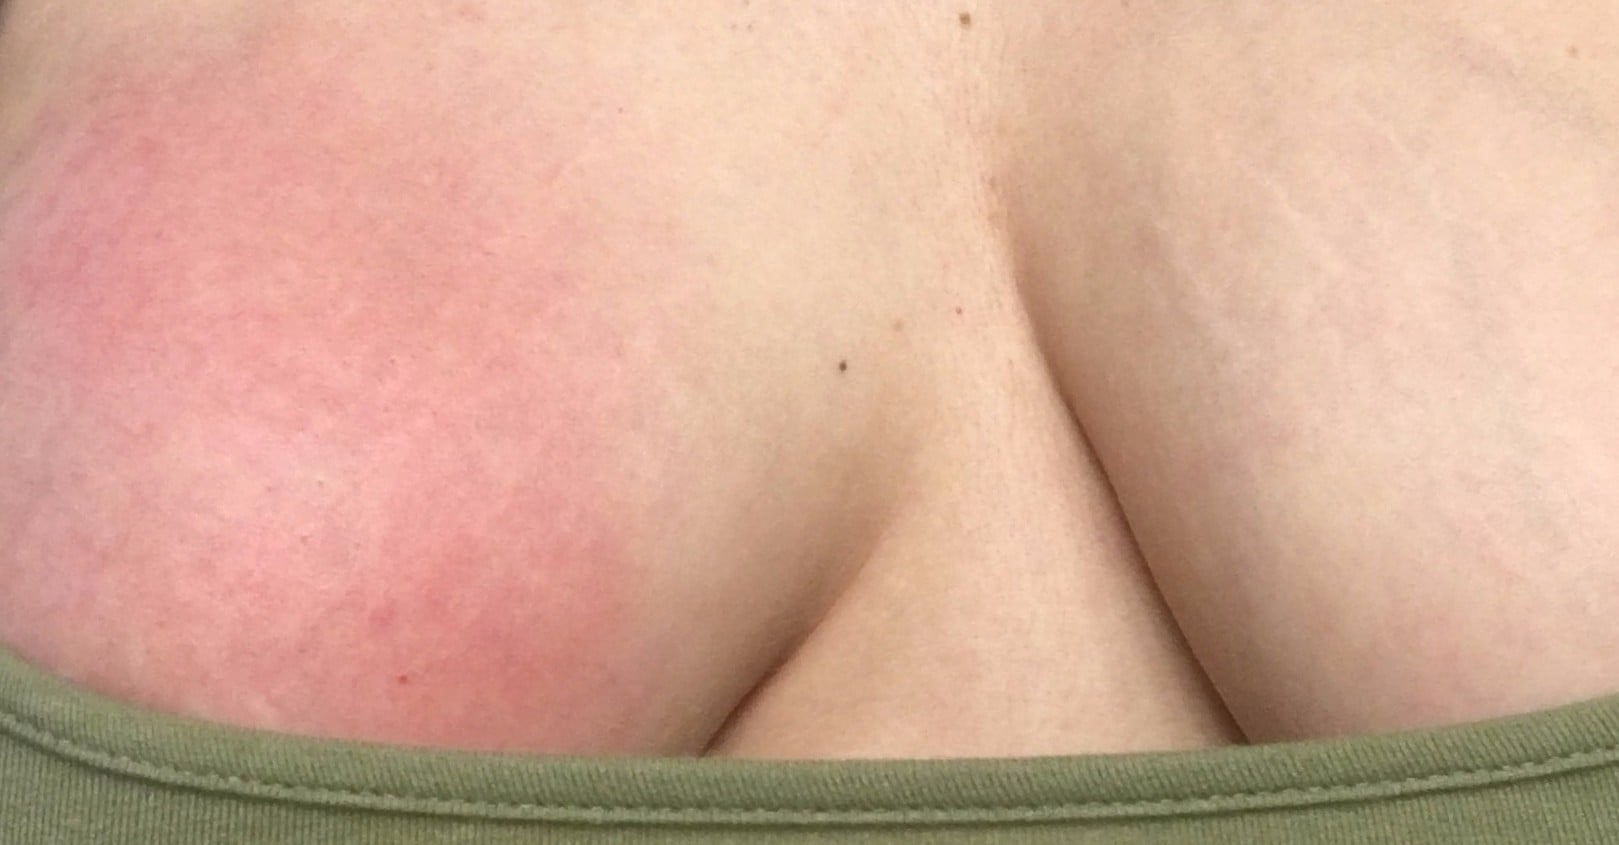 PMS boobs = Look so GOOD but hurt so BAD! Picture Courtesy